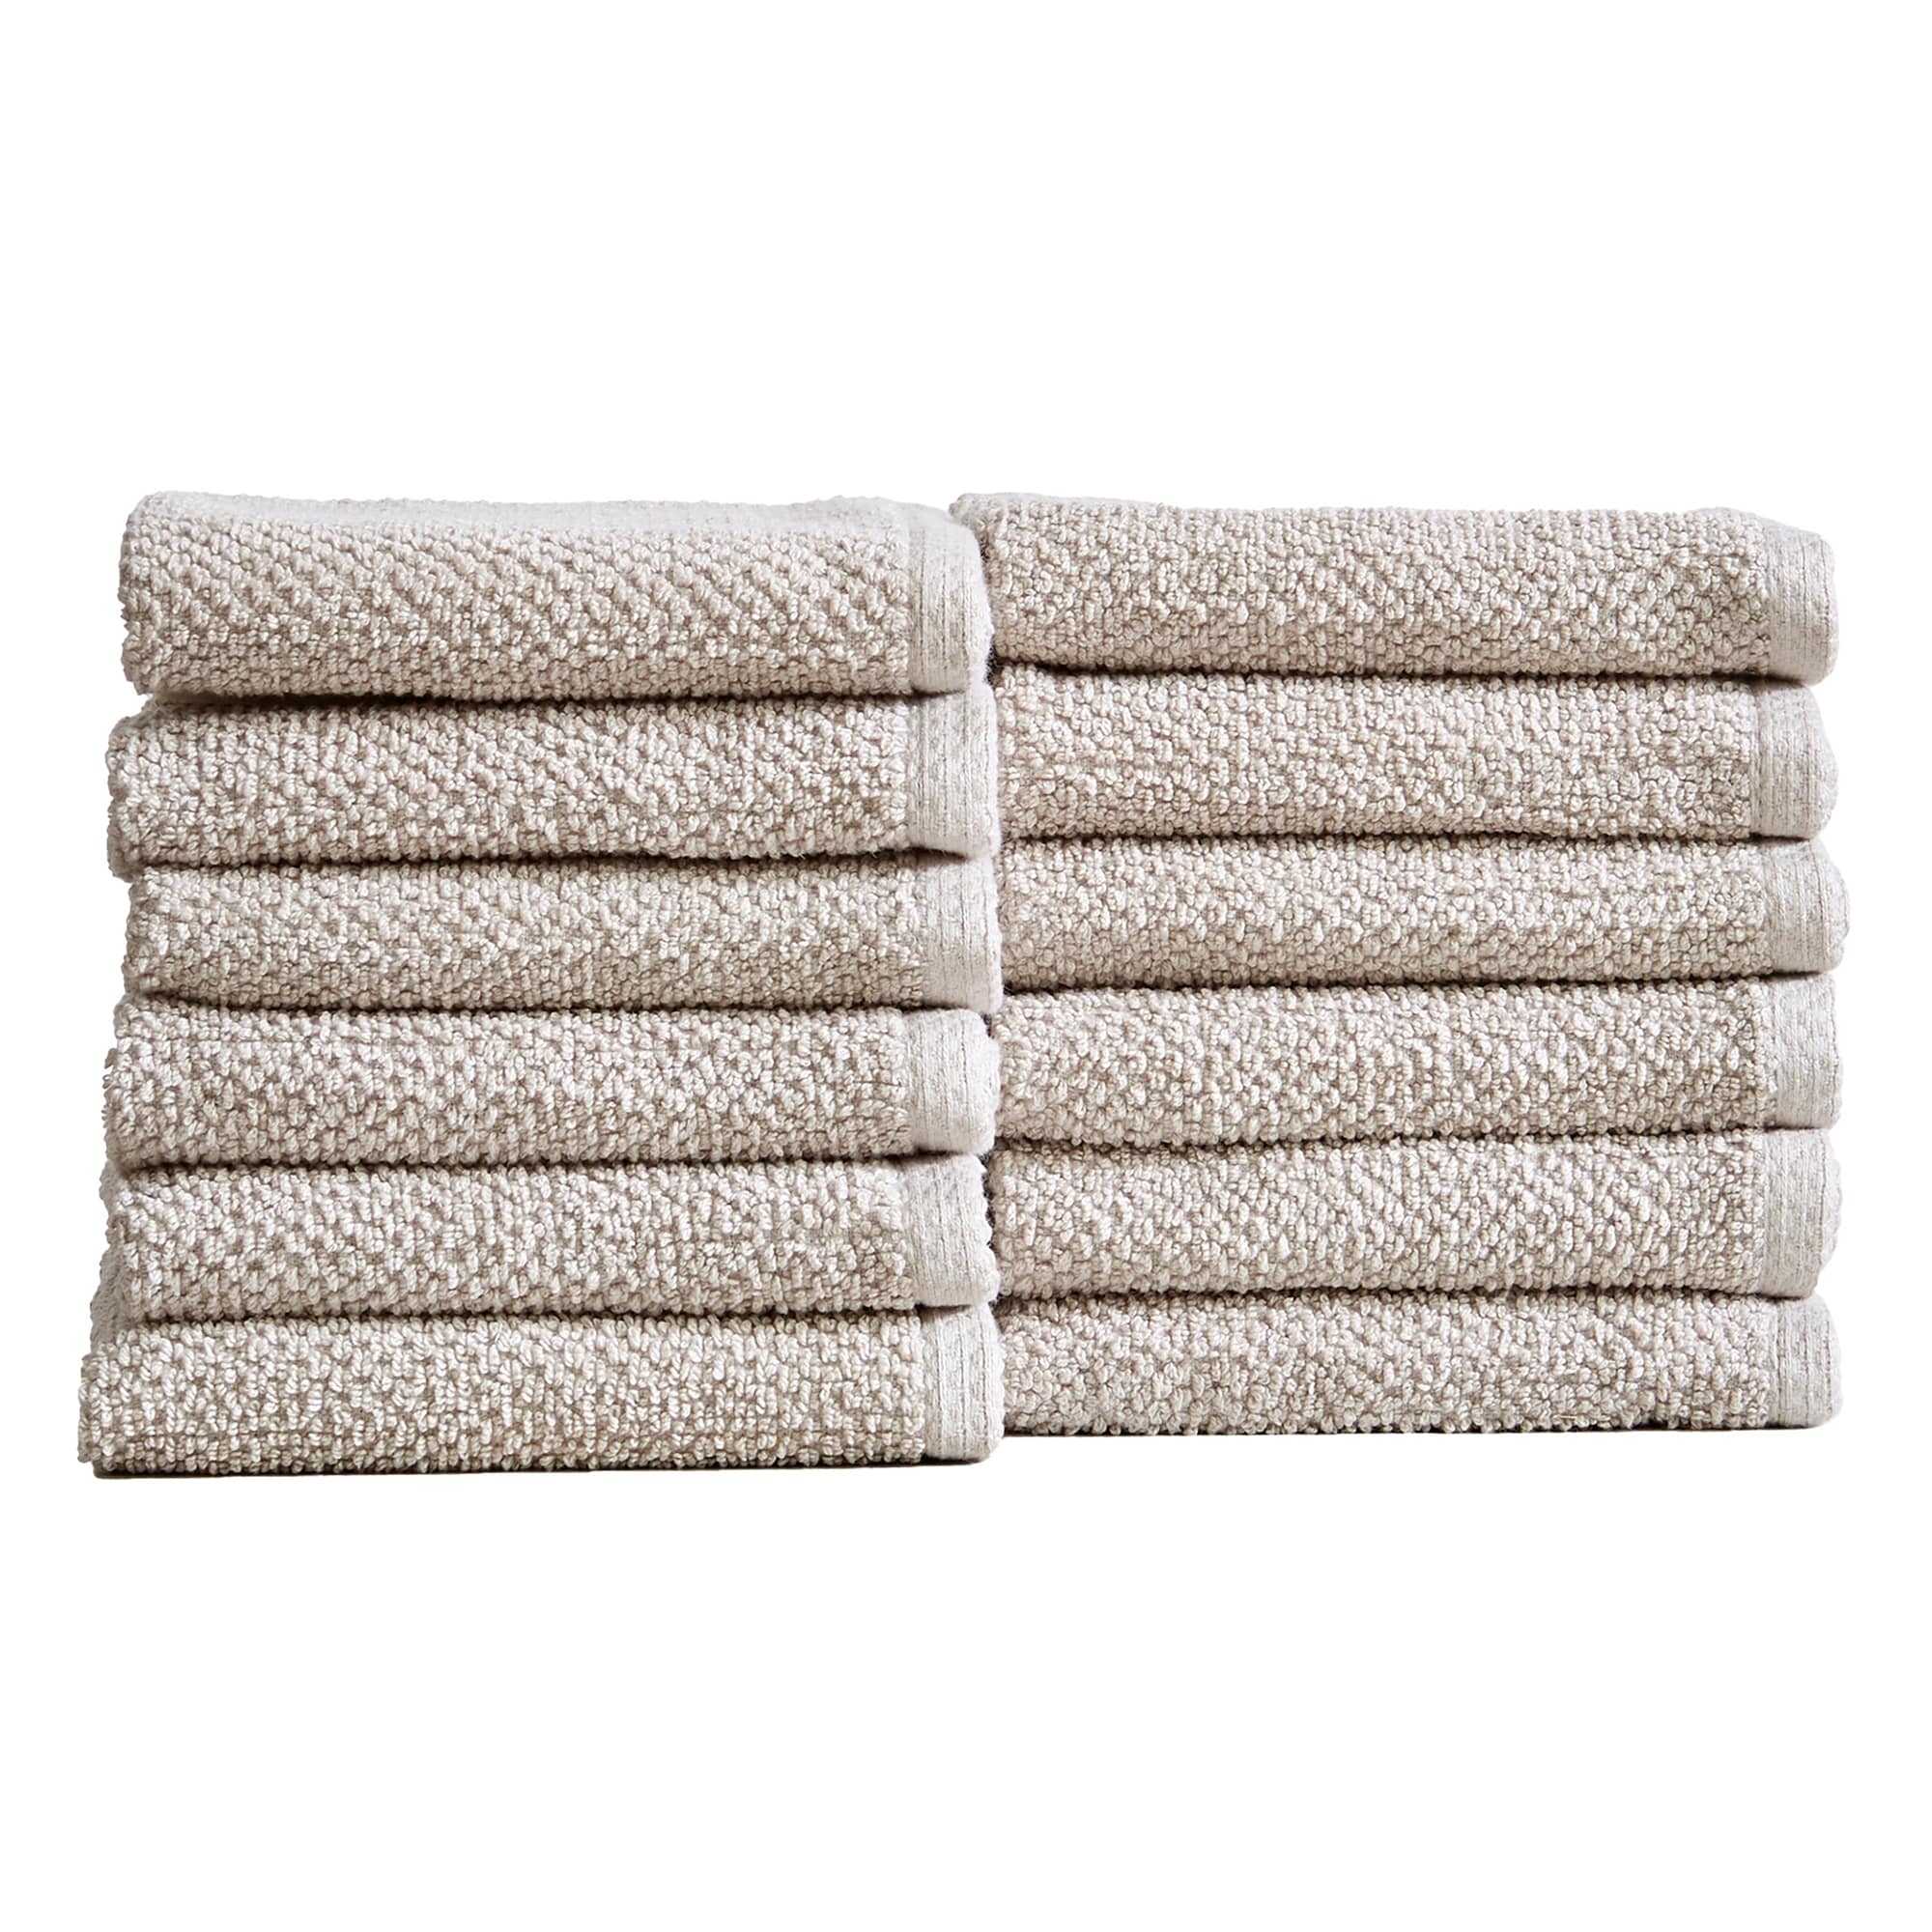 https://ak1.ostkcdn.com/images/products/is/images/direct/4515e2eec3ba9317603fd78ca211d0510a2b24ad/Great-Bay-Home-Ultra-Absorbent-Cotton-Popcorn-Towel-Set-Acacia-Collection.jpg